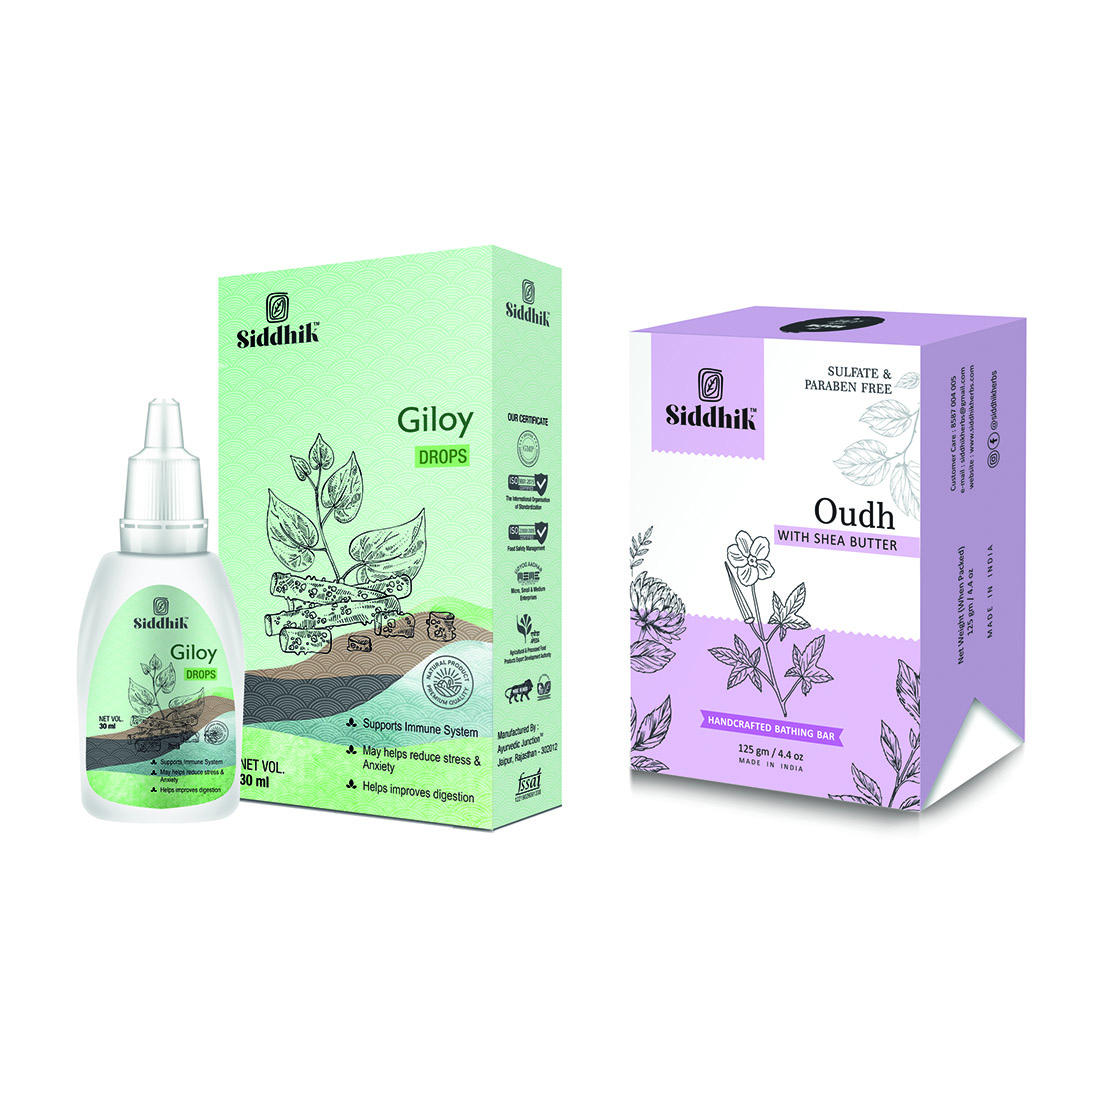 Siddhik Giloy Drops 30 ML with Oudh With Shea Butter Sulfate with Paraben Free Handcrafted Bathing Bar 125 gm